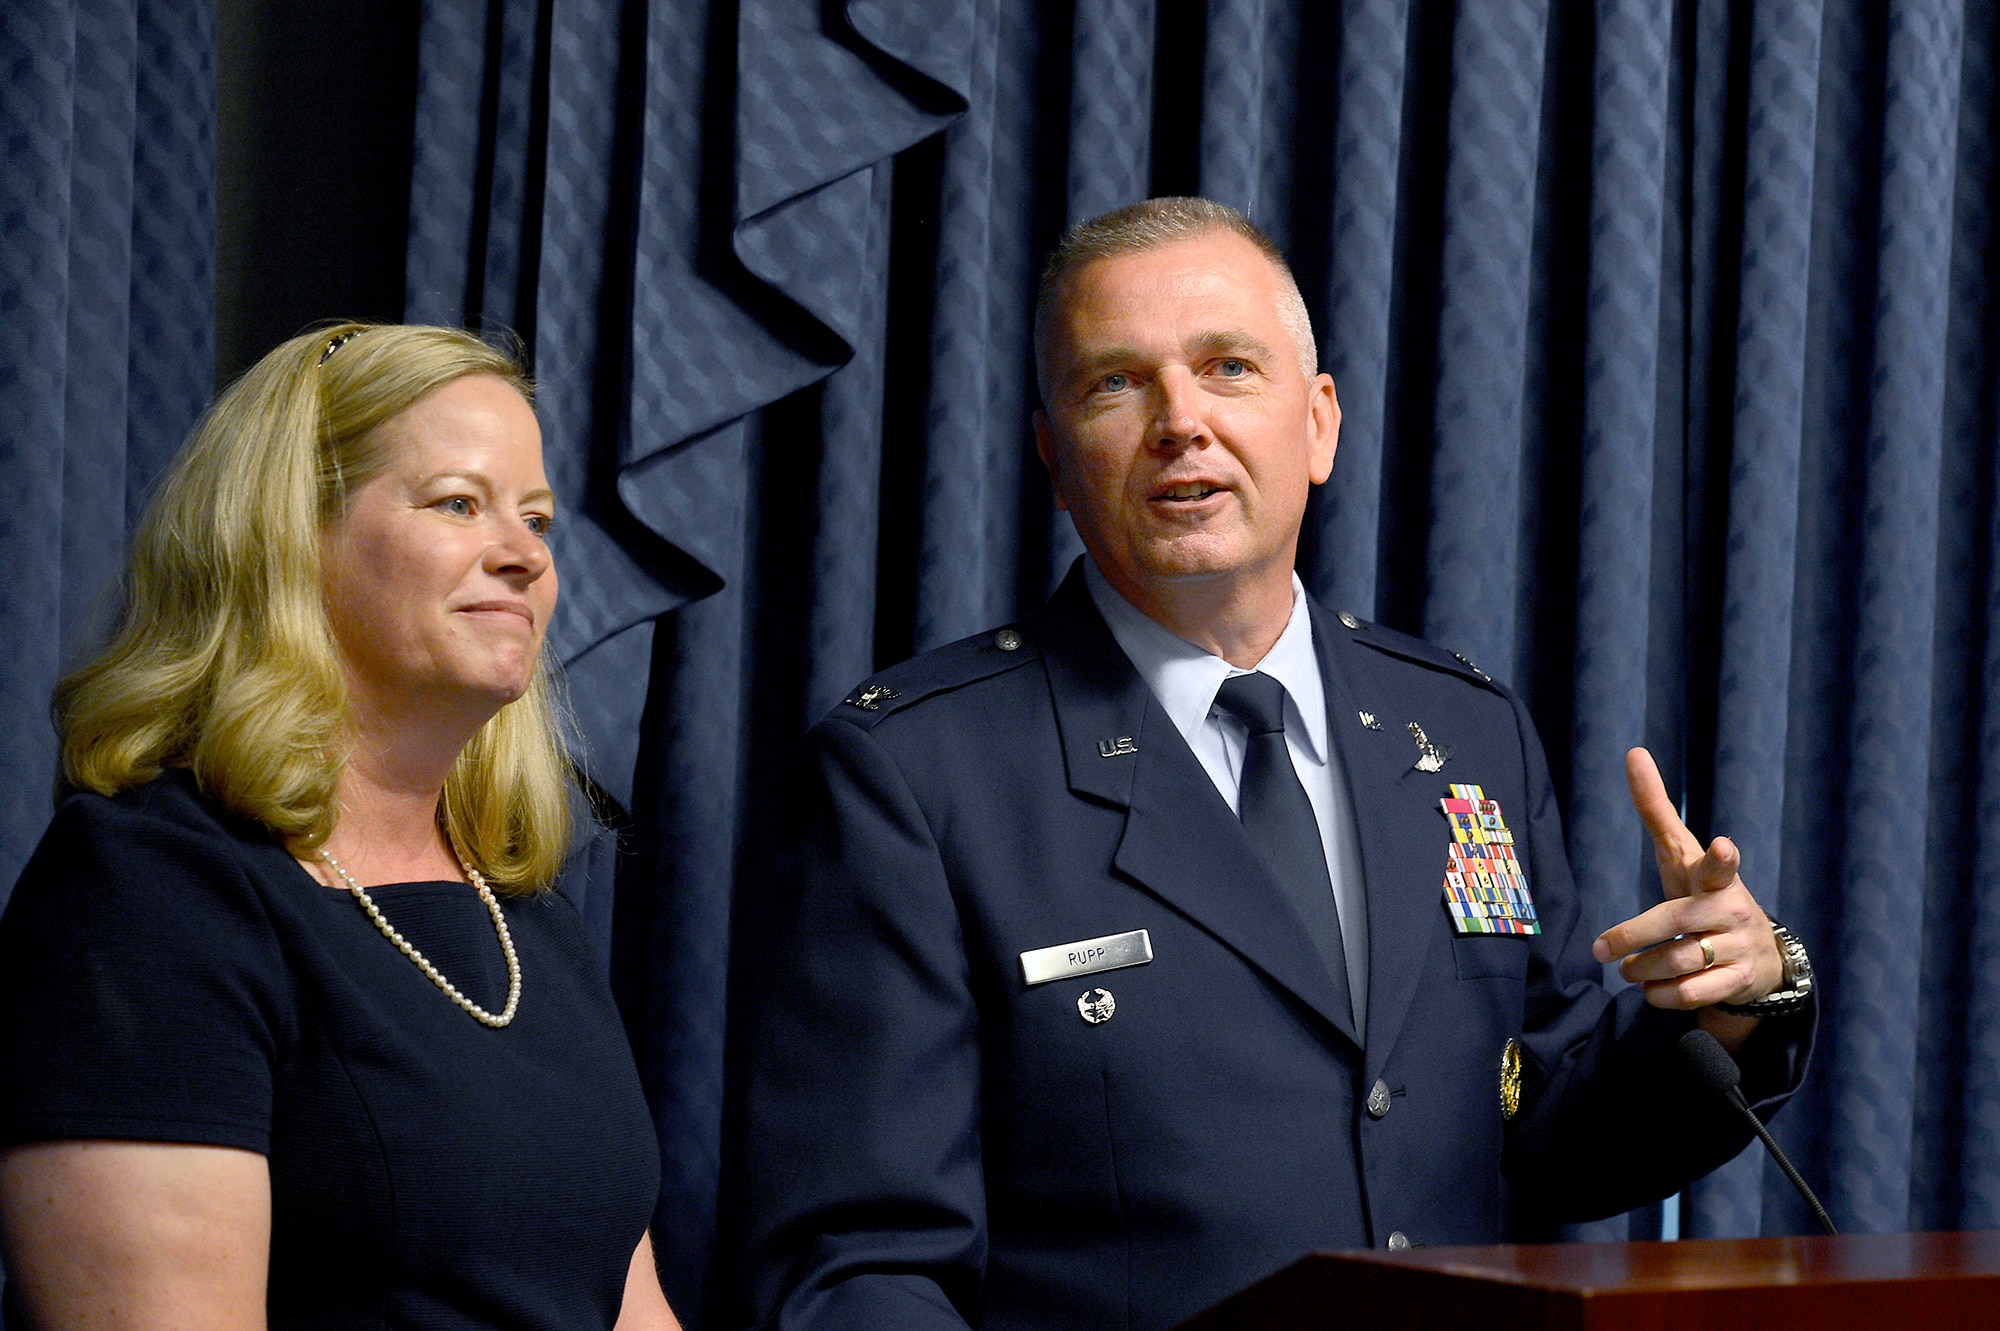 Col. Ricky Rupp, with his wife, Charlotte, speak after receiving the 2013 General and Mrs. Jerome F. O'Malley Award June 27, 2014, during a Pentagon ceremony.  Rupp, the special assistant to the commander at U.S./Republic of Korea Combined Forces Command at U.S. Army Garrison Yongsan.  The award was earned during the Rupps' time while leading the 22nd Air Refueling Wing at McConnell Air Force Base, Kan.  (U.S. Air Force photo/Scott M. Ash)